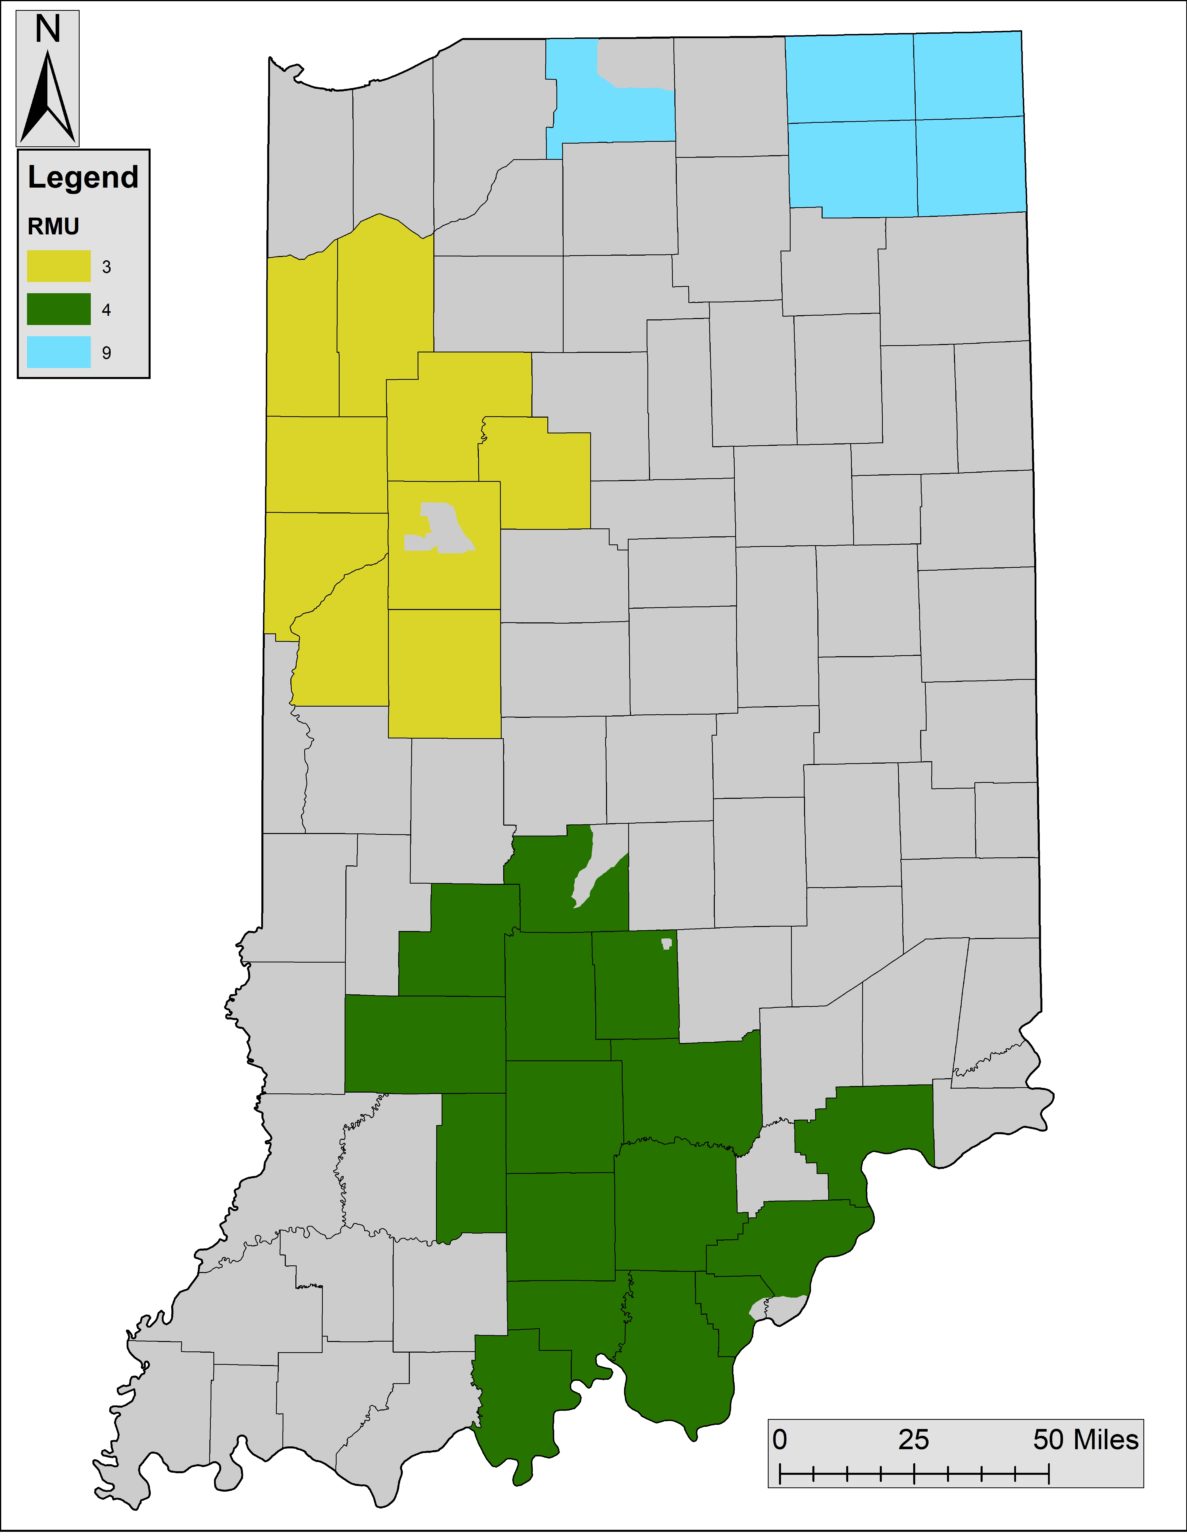 Indiana state map showing all counties and three colored-coded Research Management Units in the northwest and northeast and southern portions of the state.